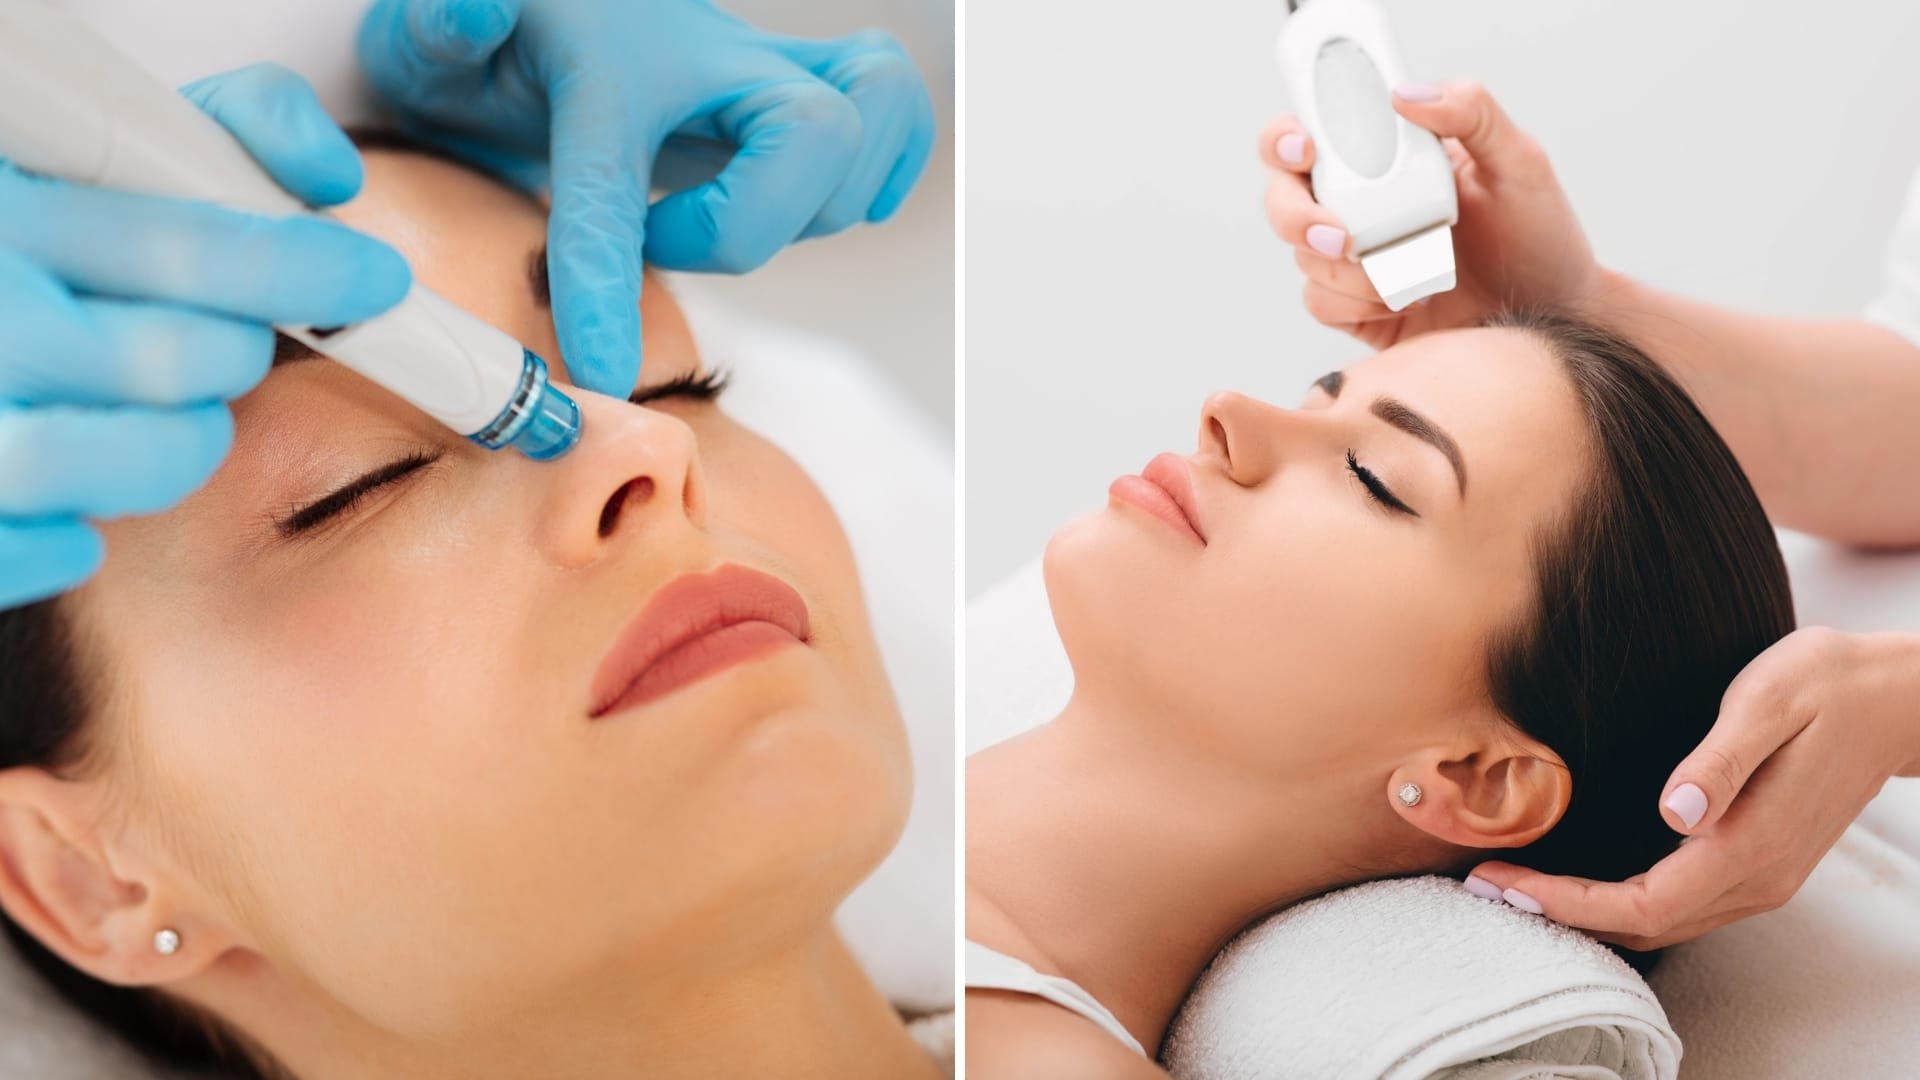 Good Skin: The Best Medical Centers for HydraFacial in Dubai